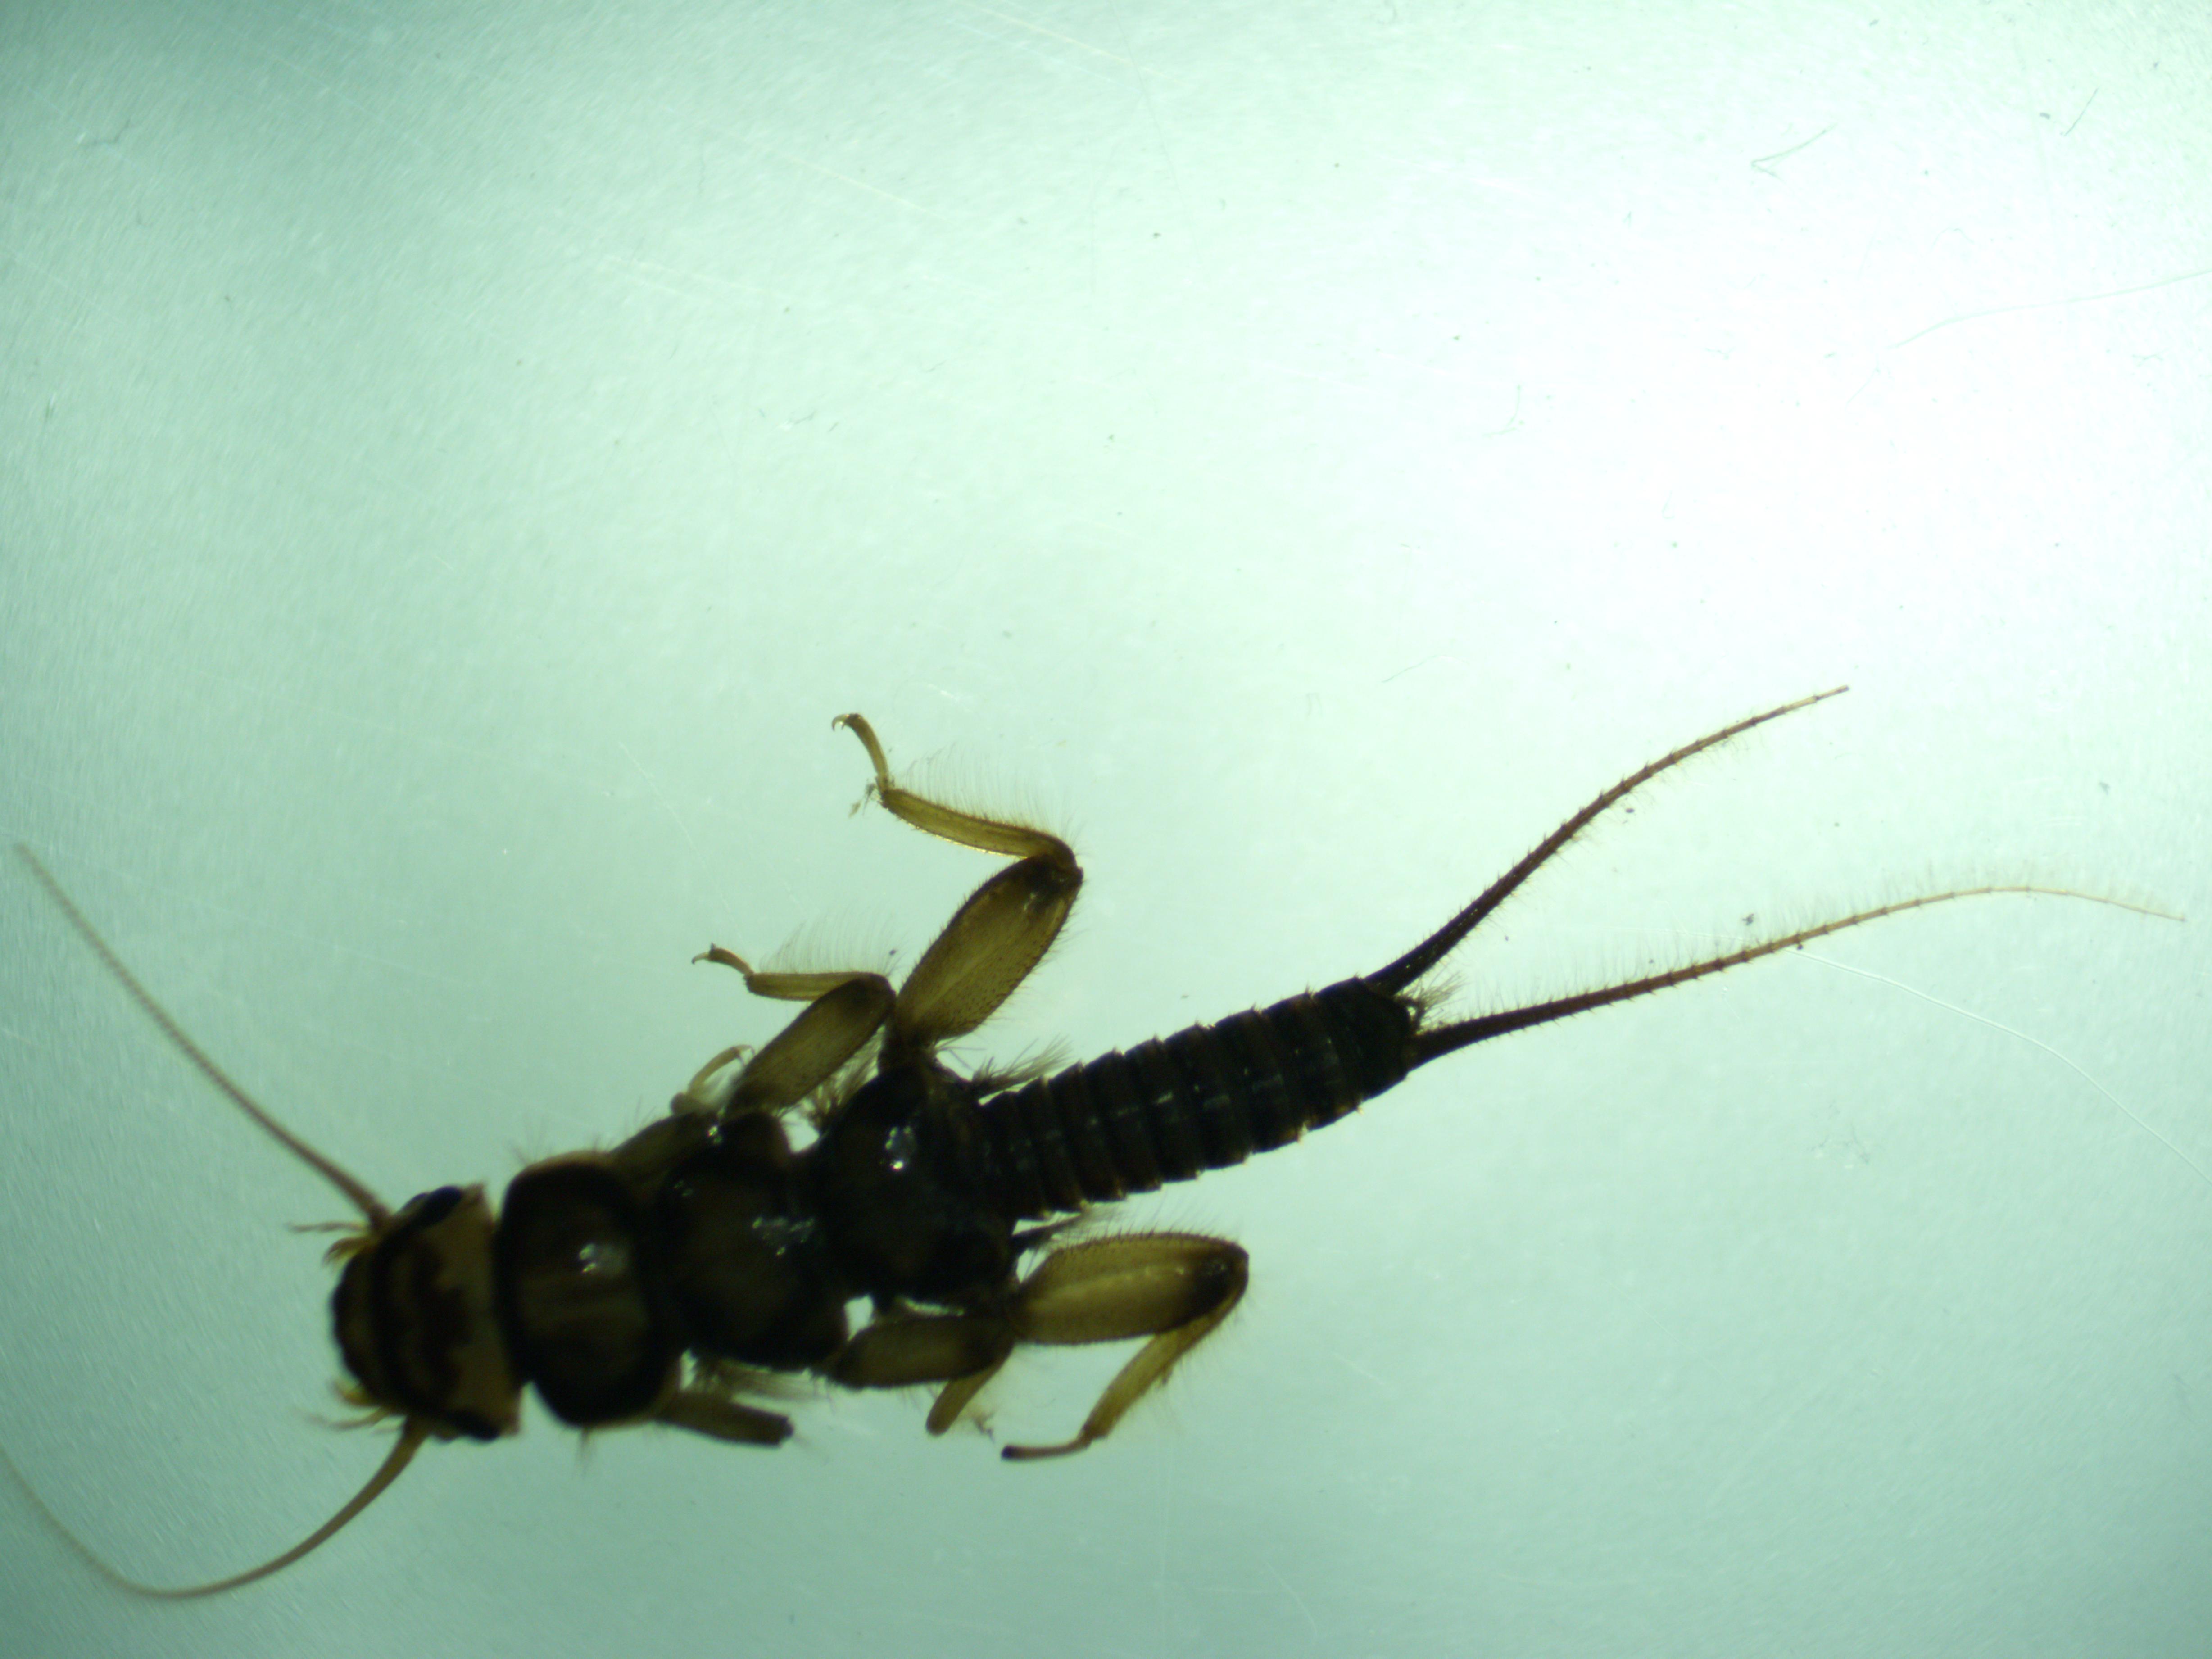 Not many stoneflies turned up in our samples but here's a nice big Acroneuria for ya!